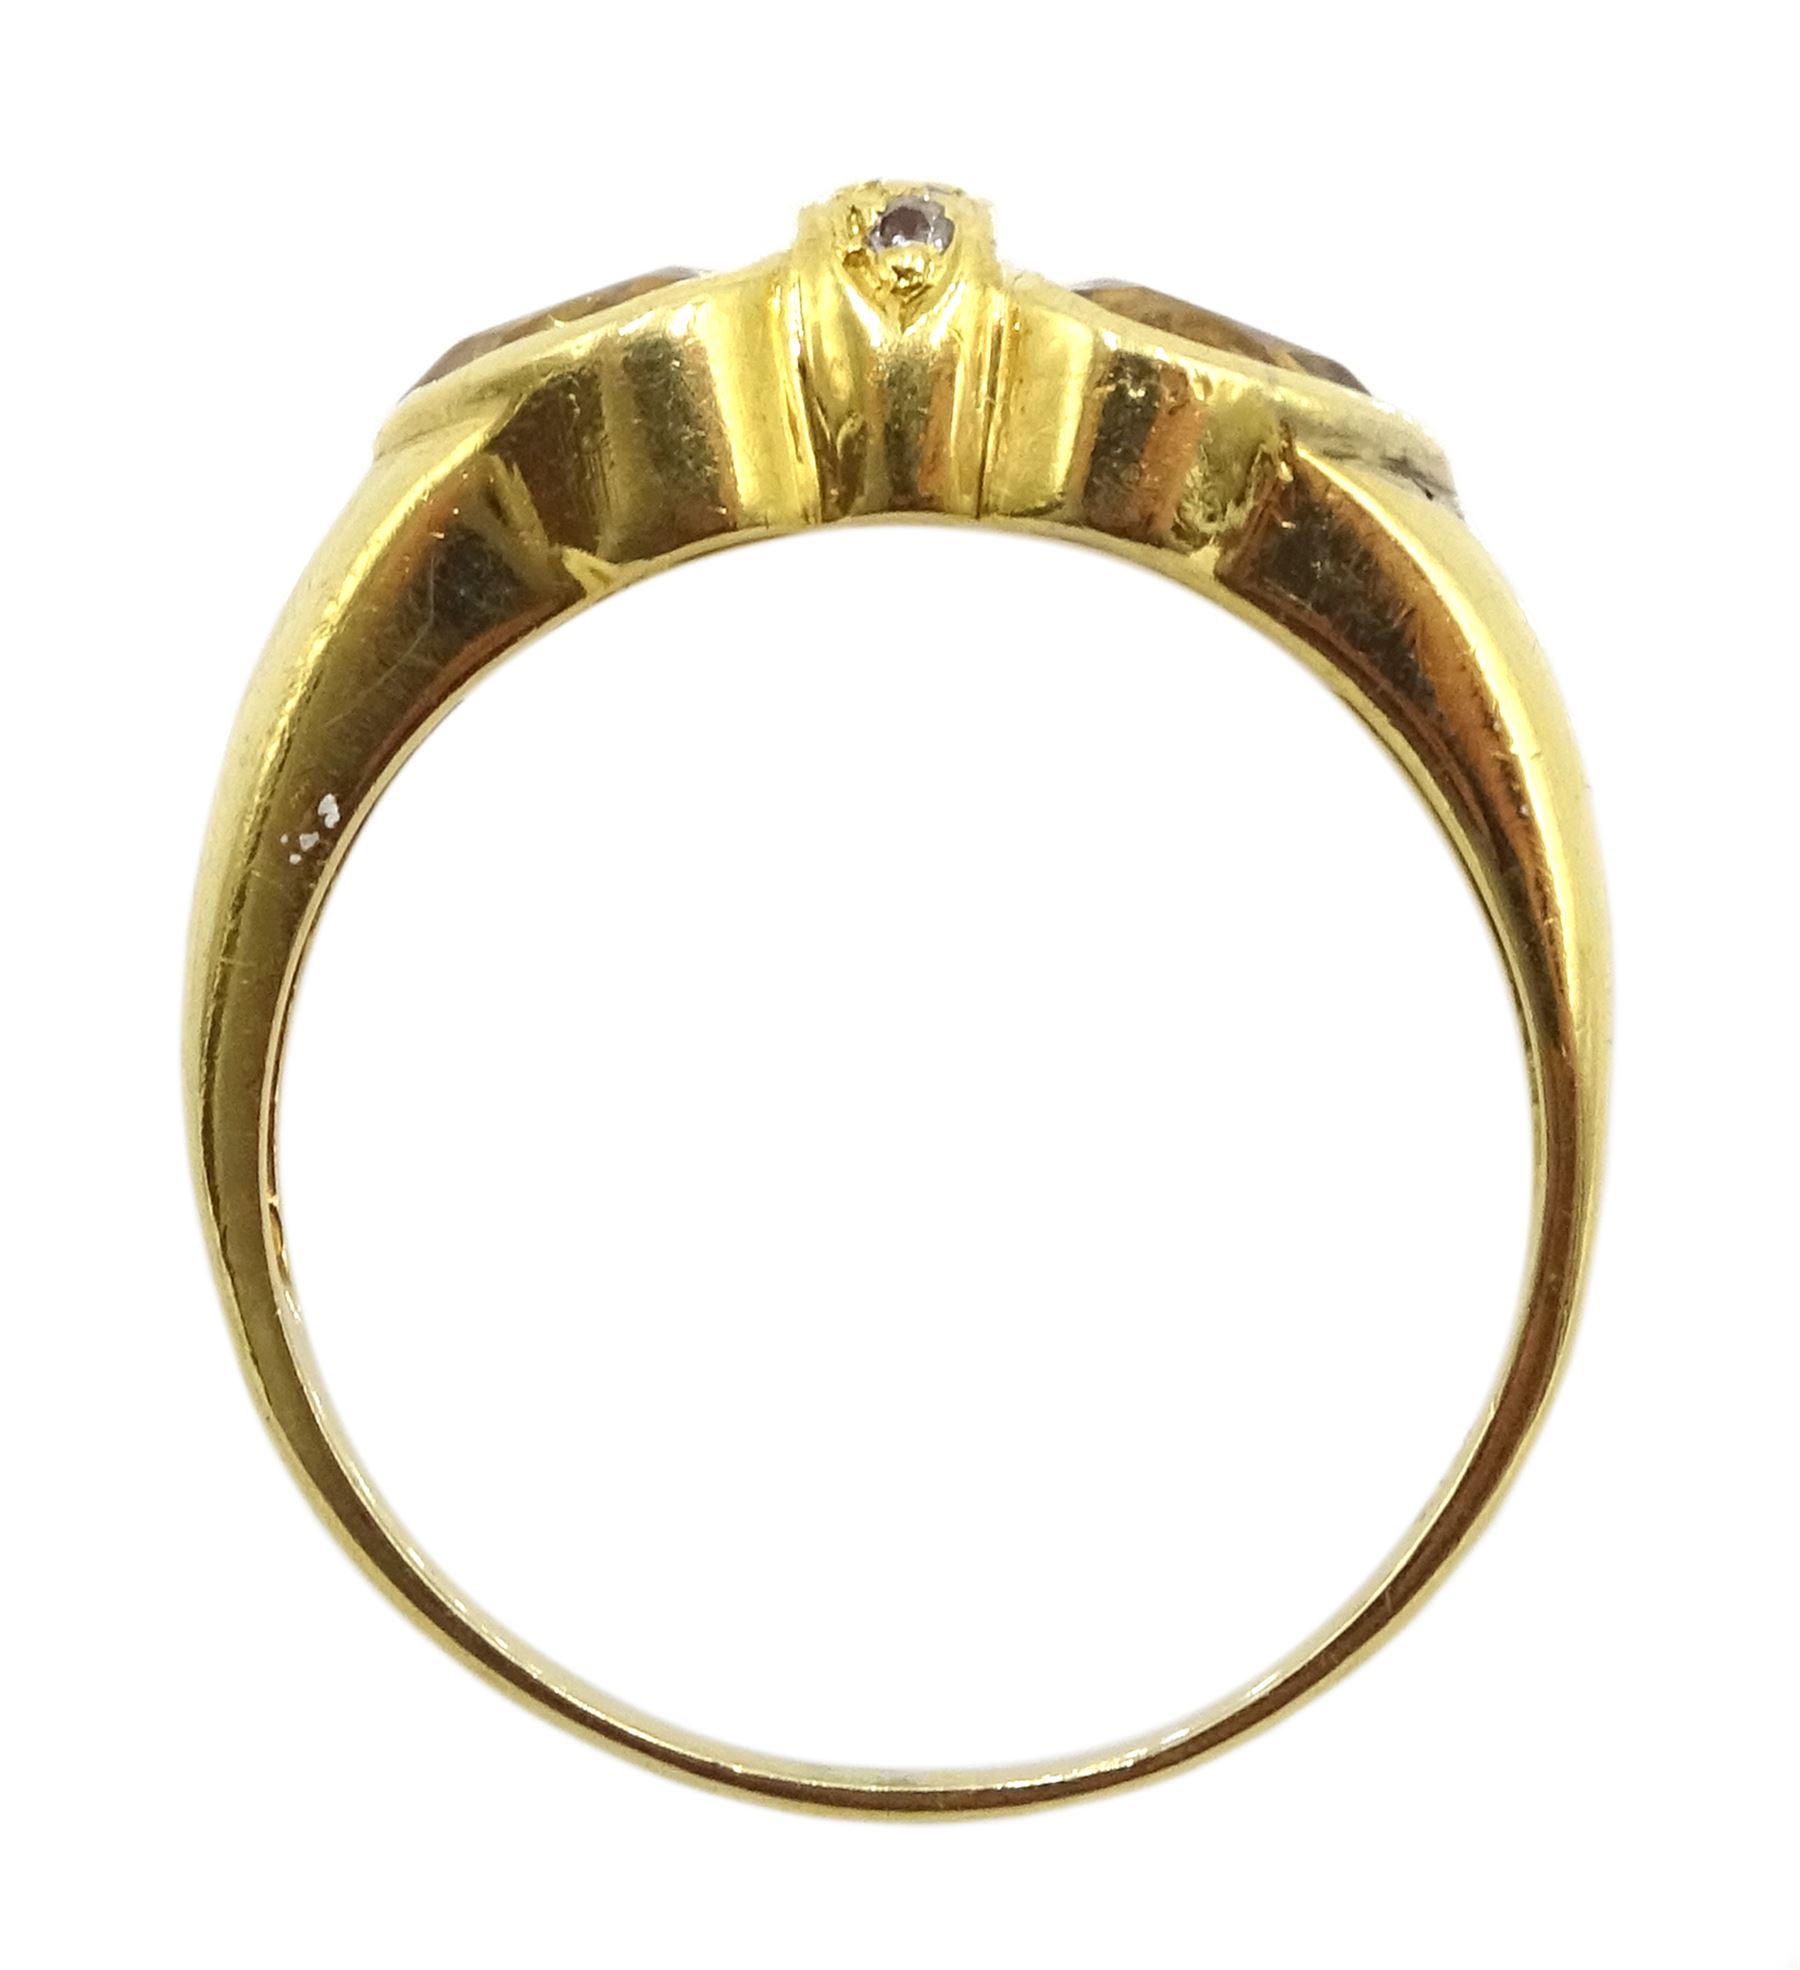 18ct gold citrine and diamond ring - Image 4 of 4